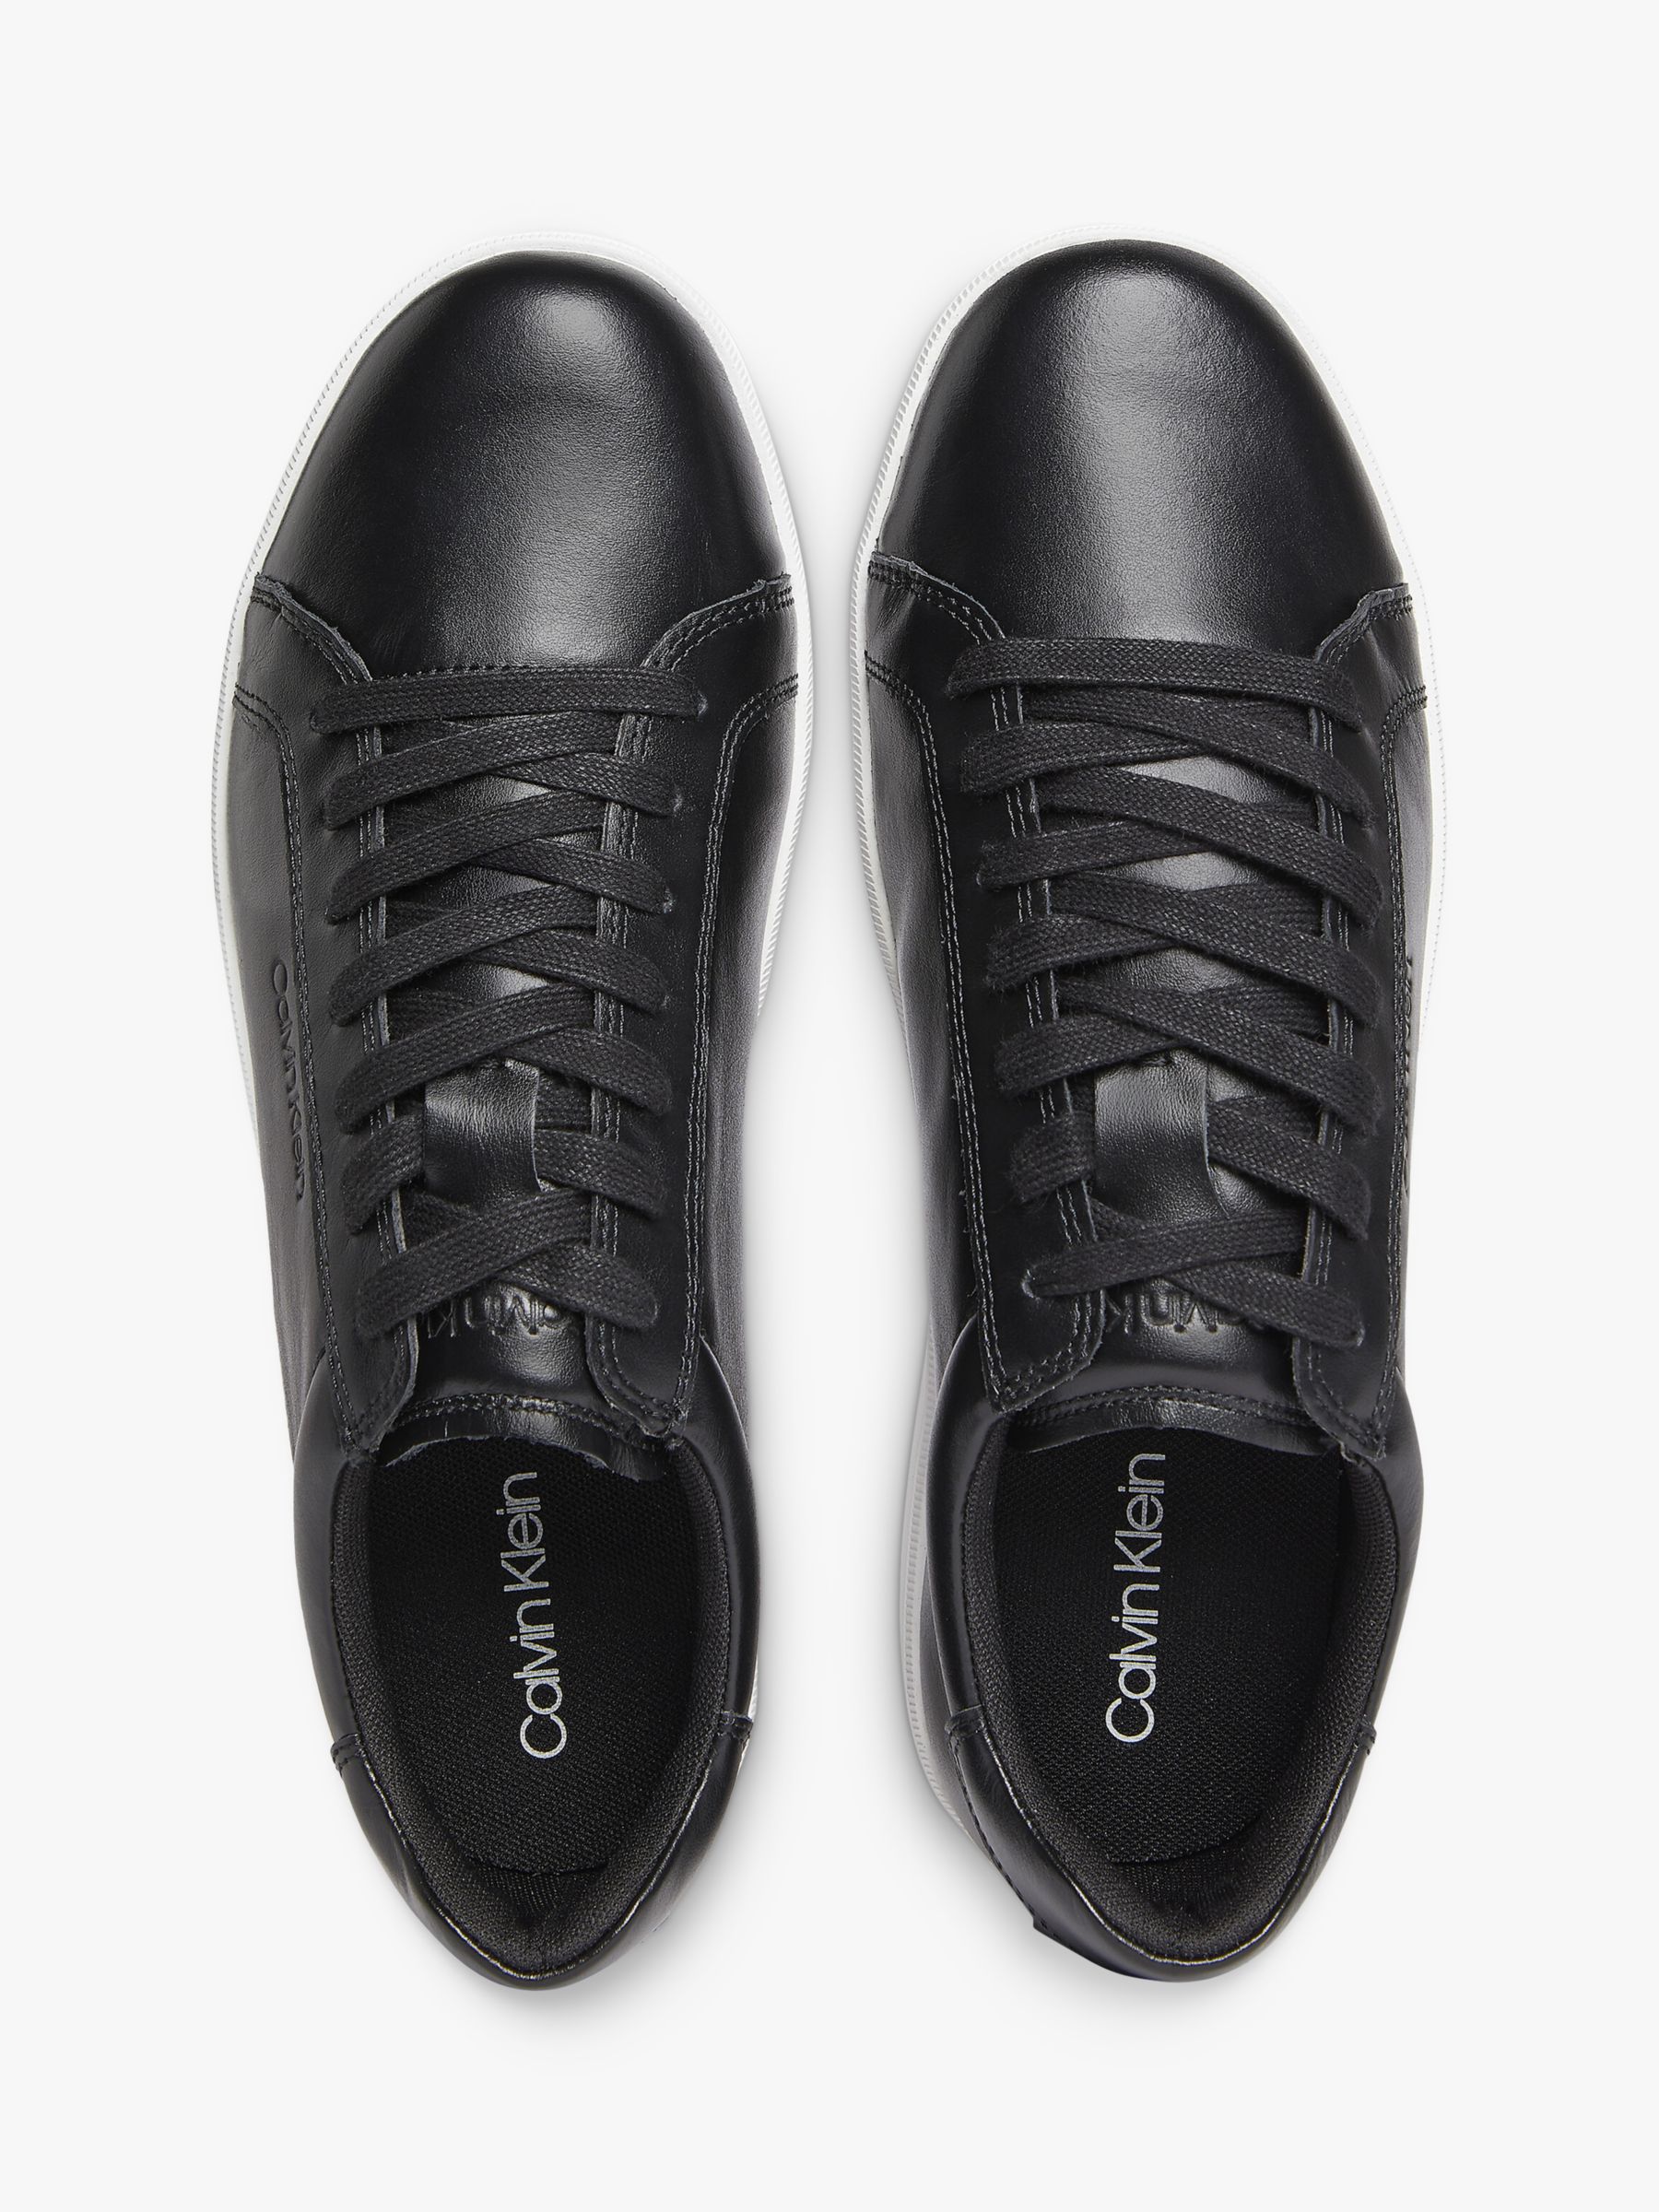 Calvin Klein Leather Low Top Lace Up Trainers, CK Black at John Lewis ...